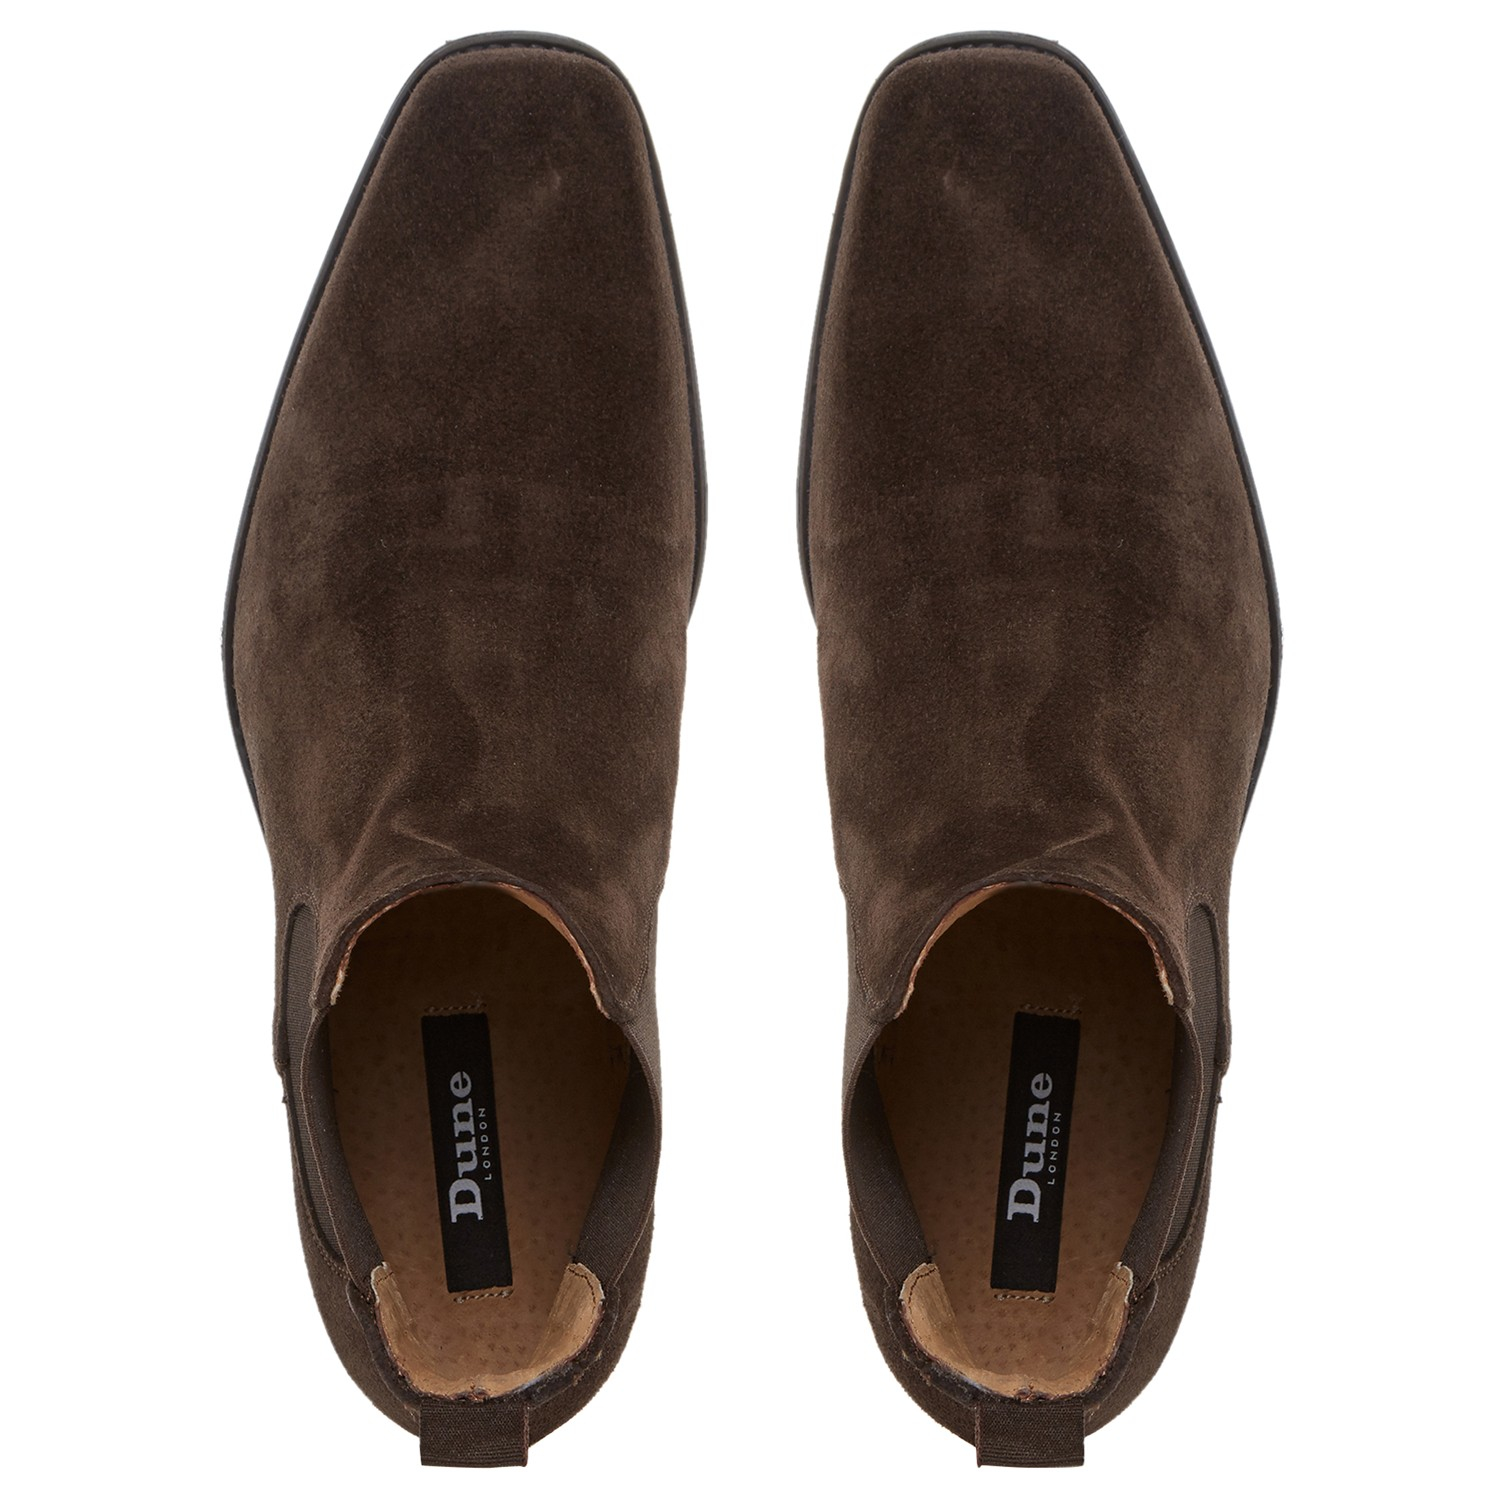 Dune Marky Suede Chelsea Boots in Brown 